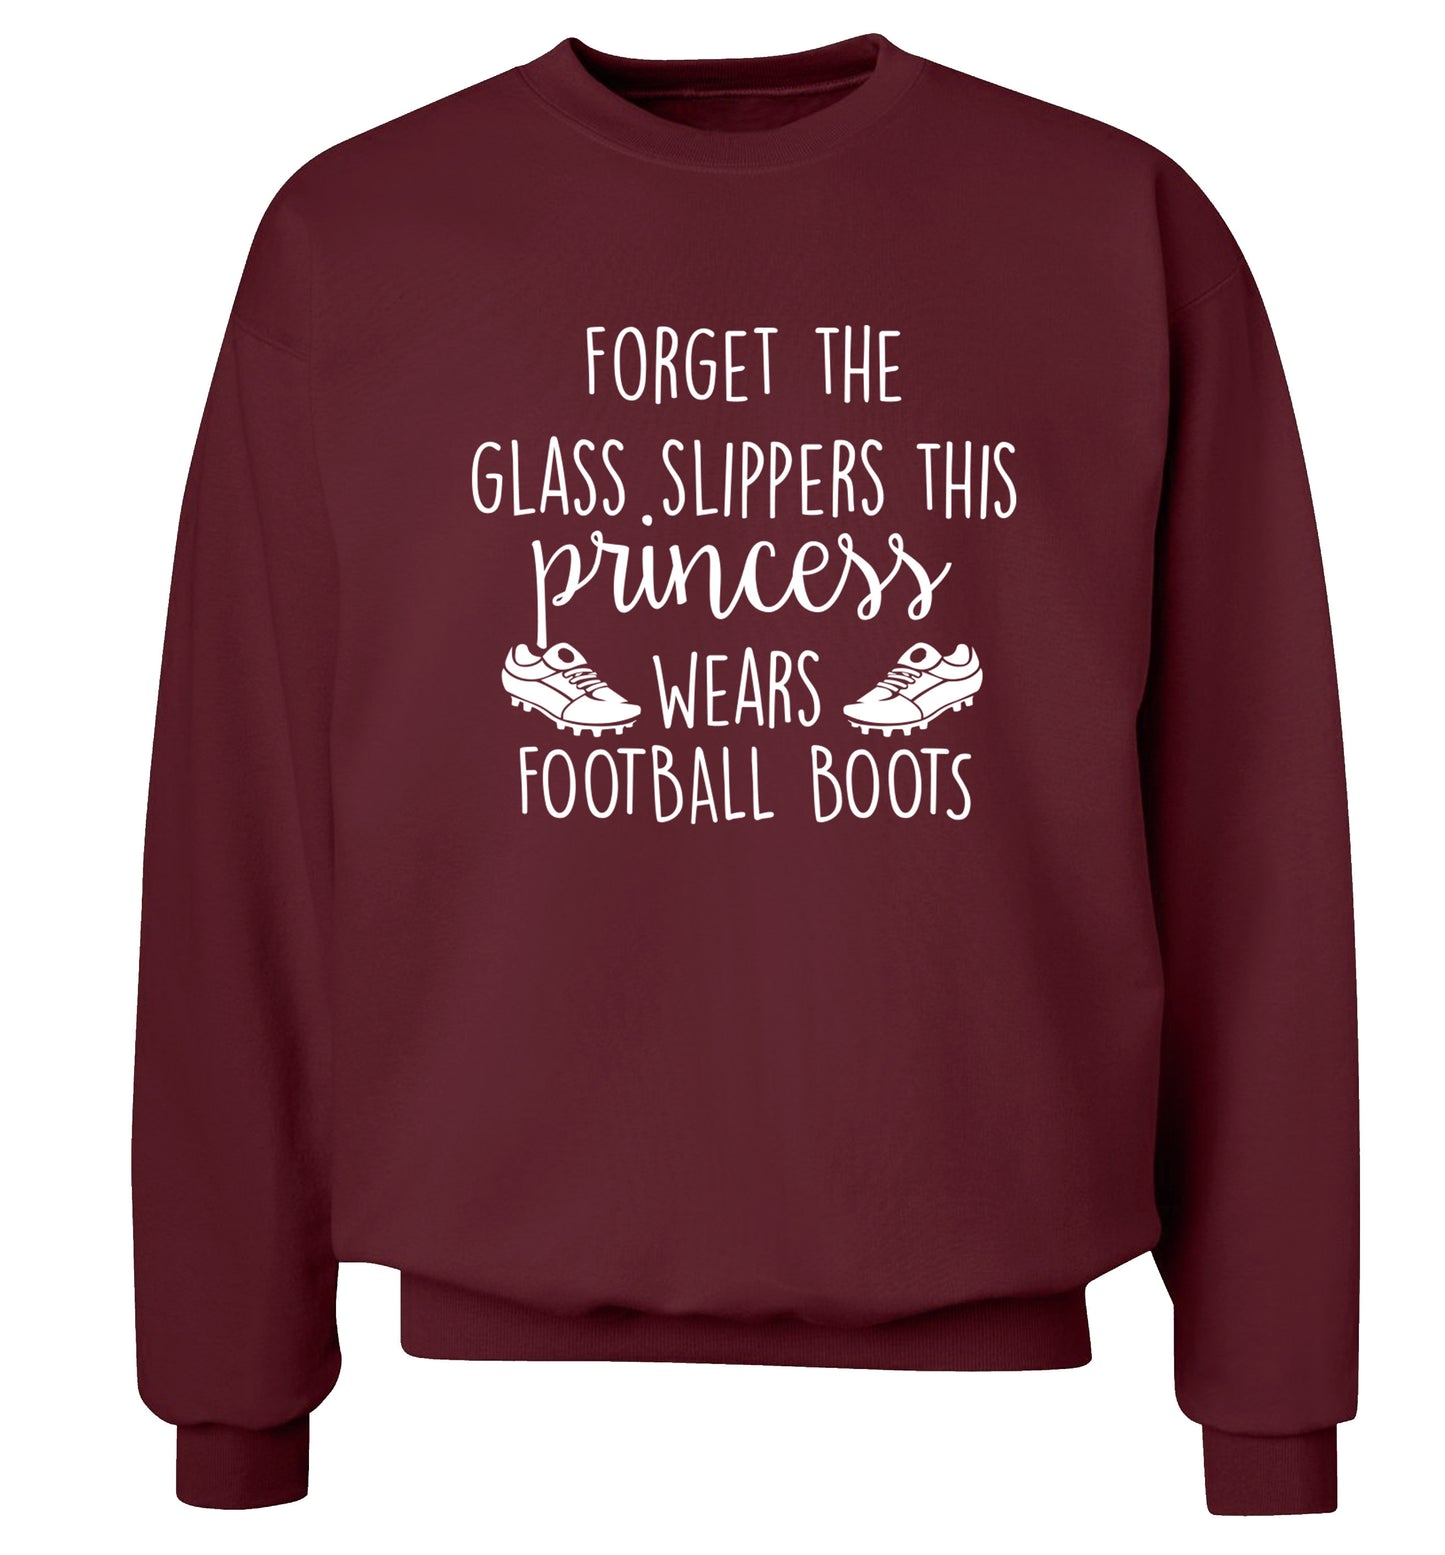 Forget the glass slippers this princess wears football boots Adult's unisex maroon Sweater 2XL